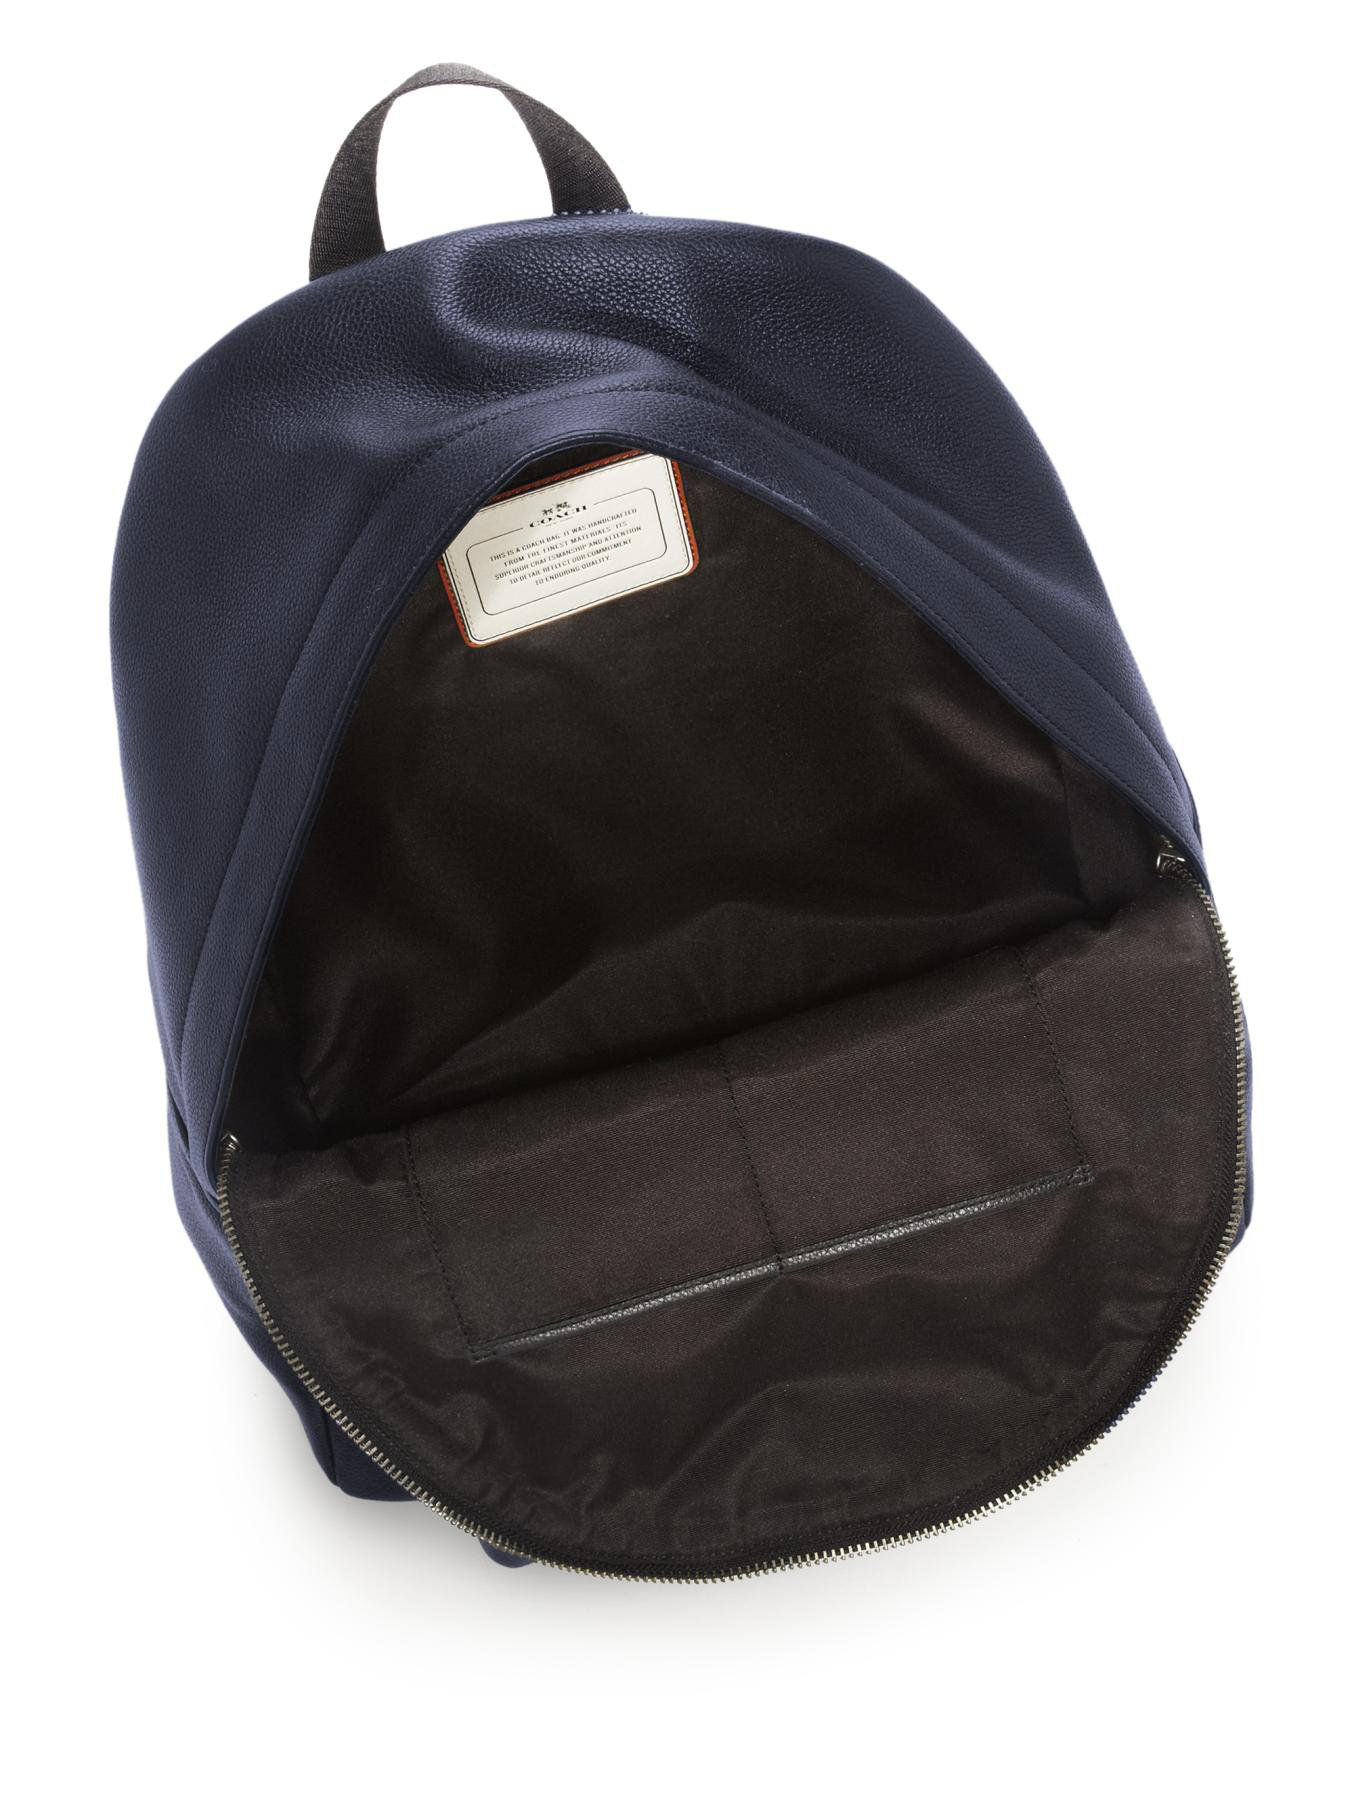 Lyst - Coach Refined Pebbled Leather Backpack in Blue for Men